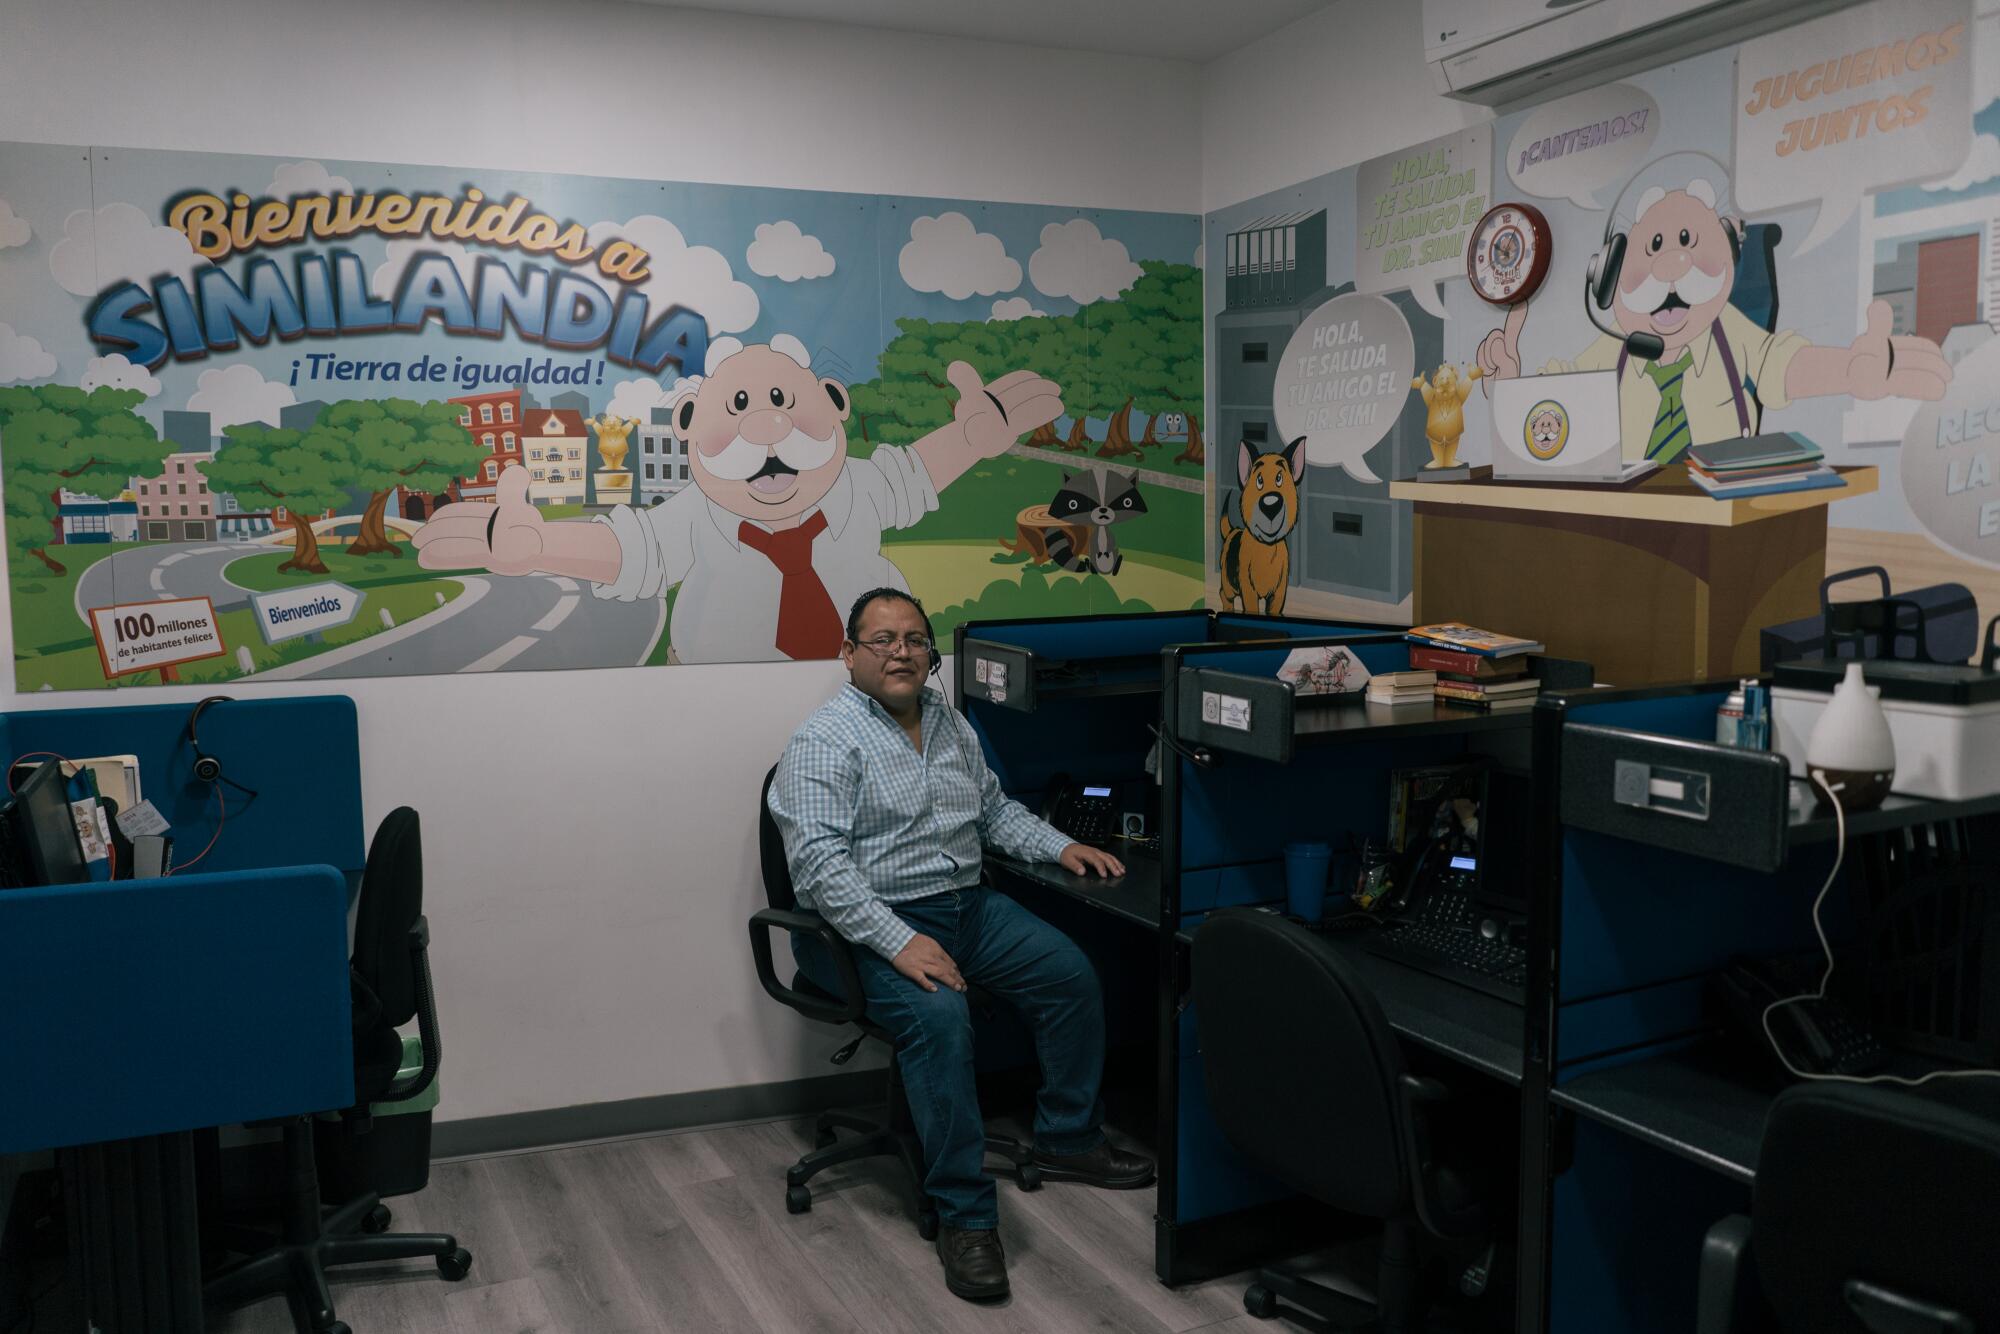 A man sits at a workstation. Behind him is a poster of a mustachioed character and the words Bienvenidos a Similandia 